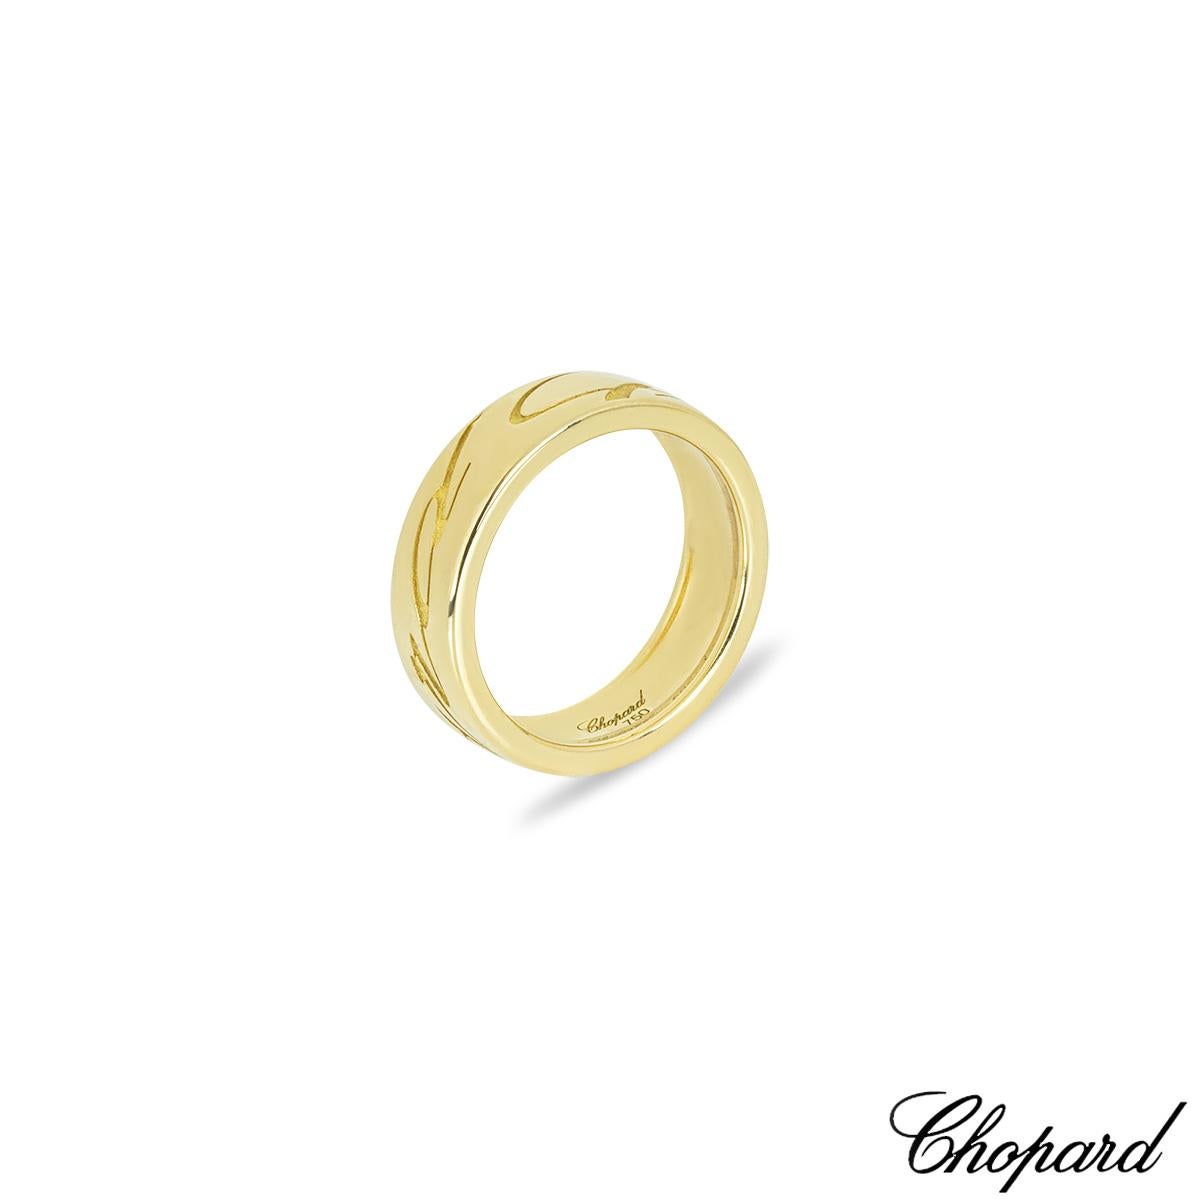 A charming 18k yellow gold Chopard ring from the Chopardissimo collection. The 6mm wide band is engraved Chopard in a calligraphy style throughout the ring. It is a UK size N/ US size 6 1/2/ EU size 53 and has a gross weight of 8.15 grams.

Comes